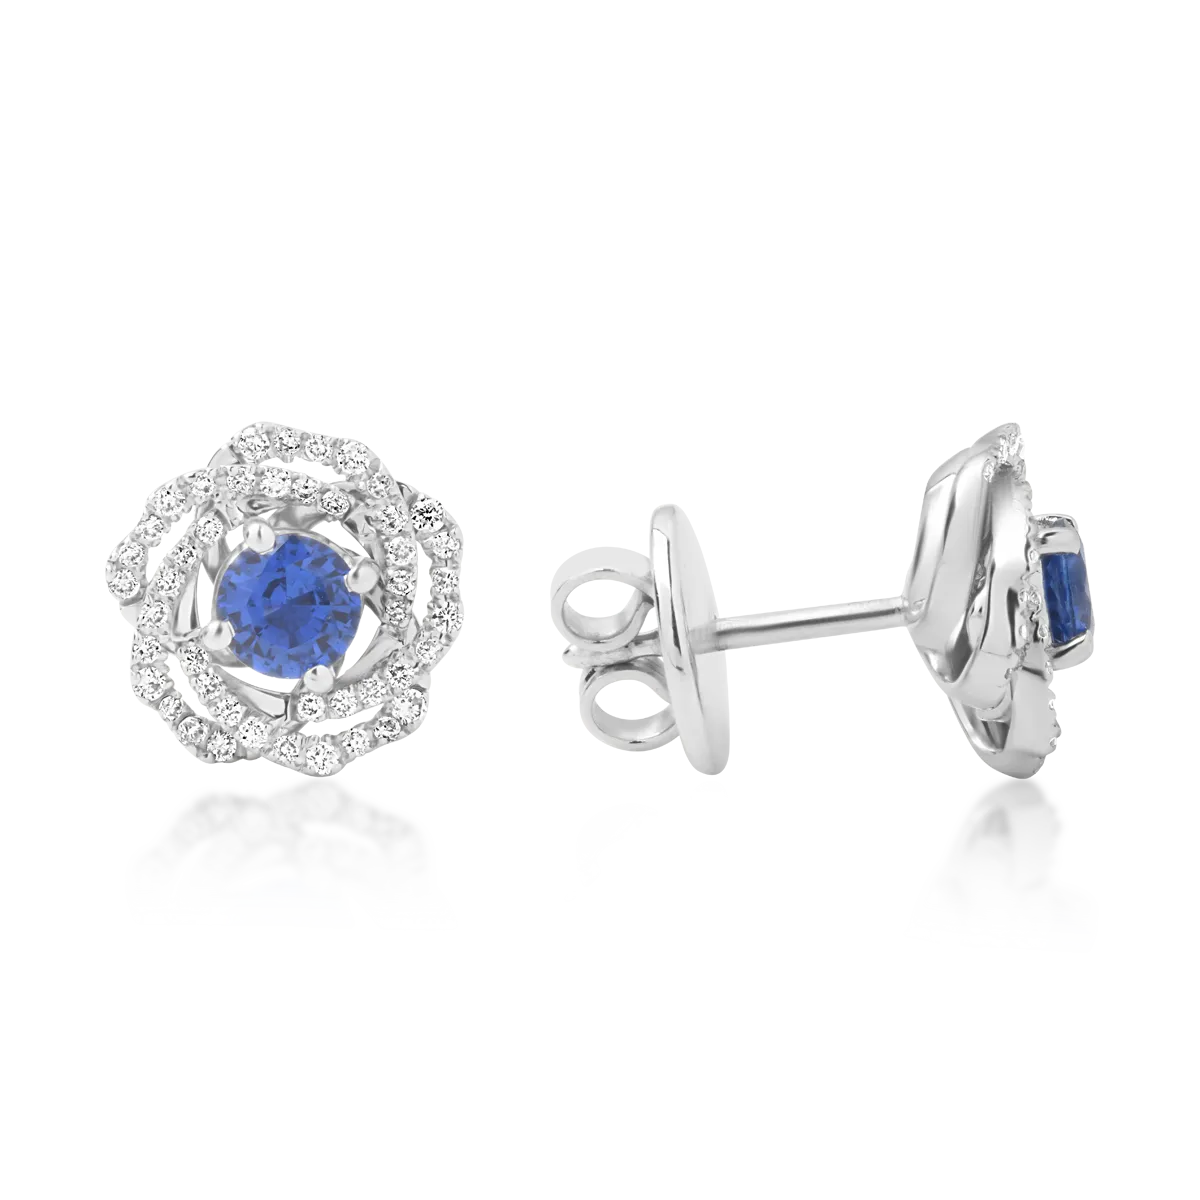 18K white gold earrings with 0.7ct sapphires and 0.26ct diamonds